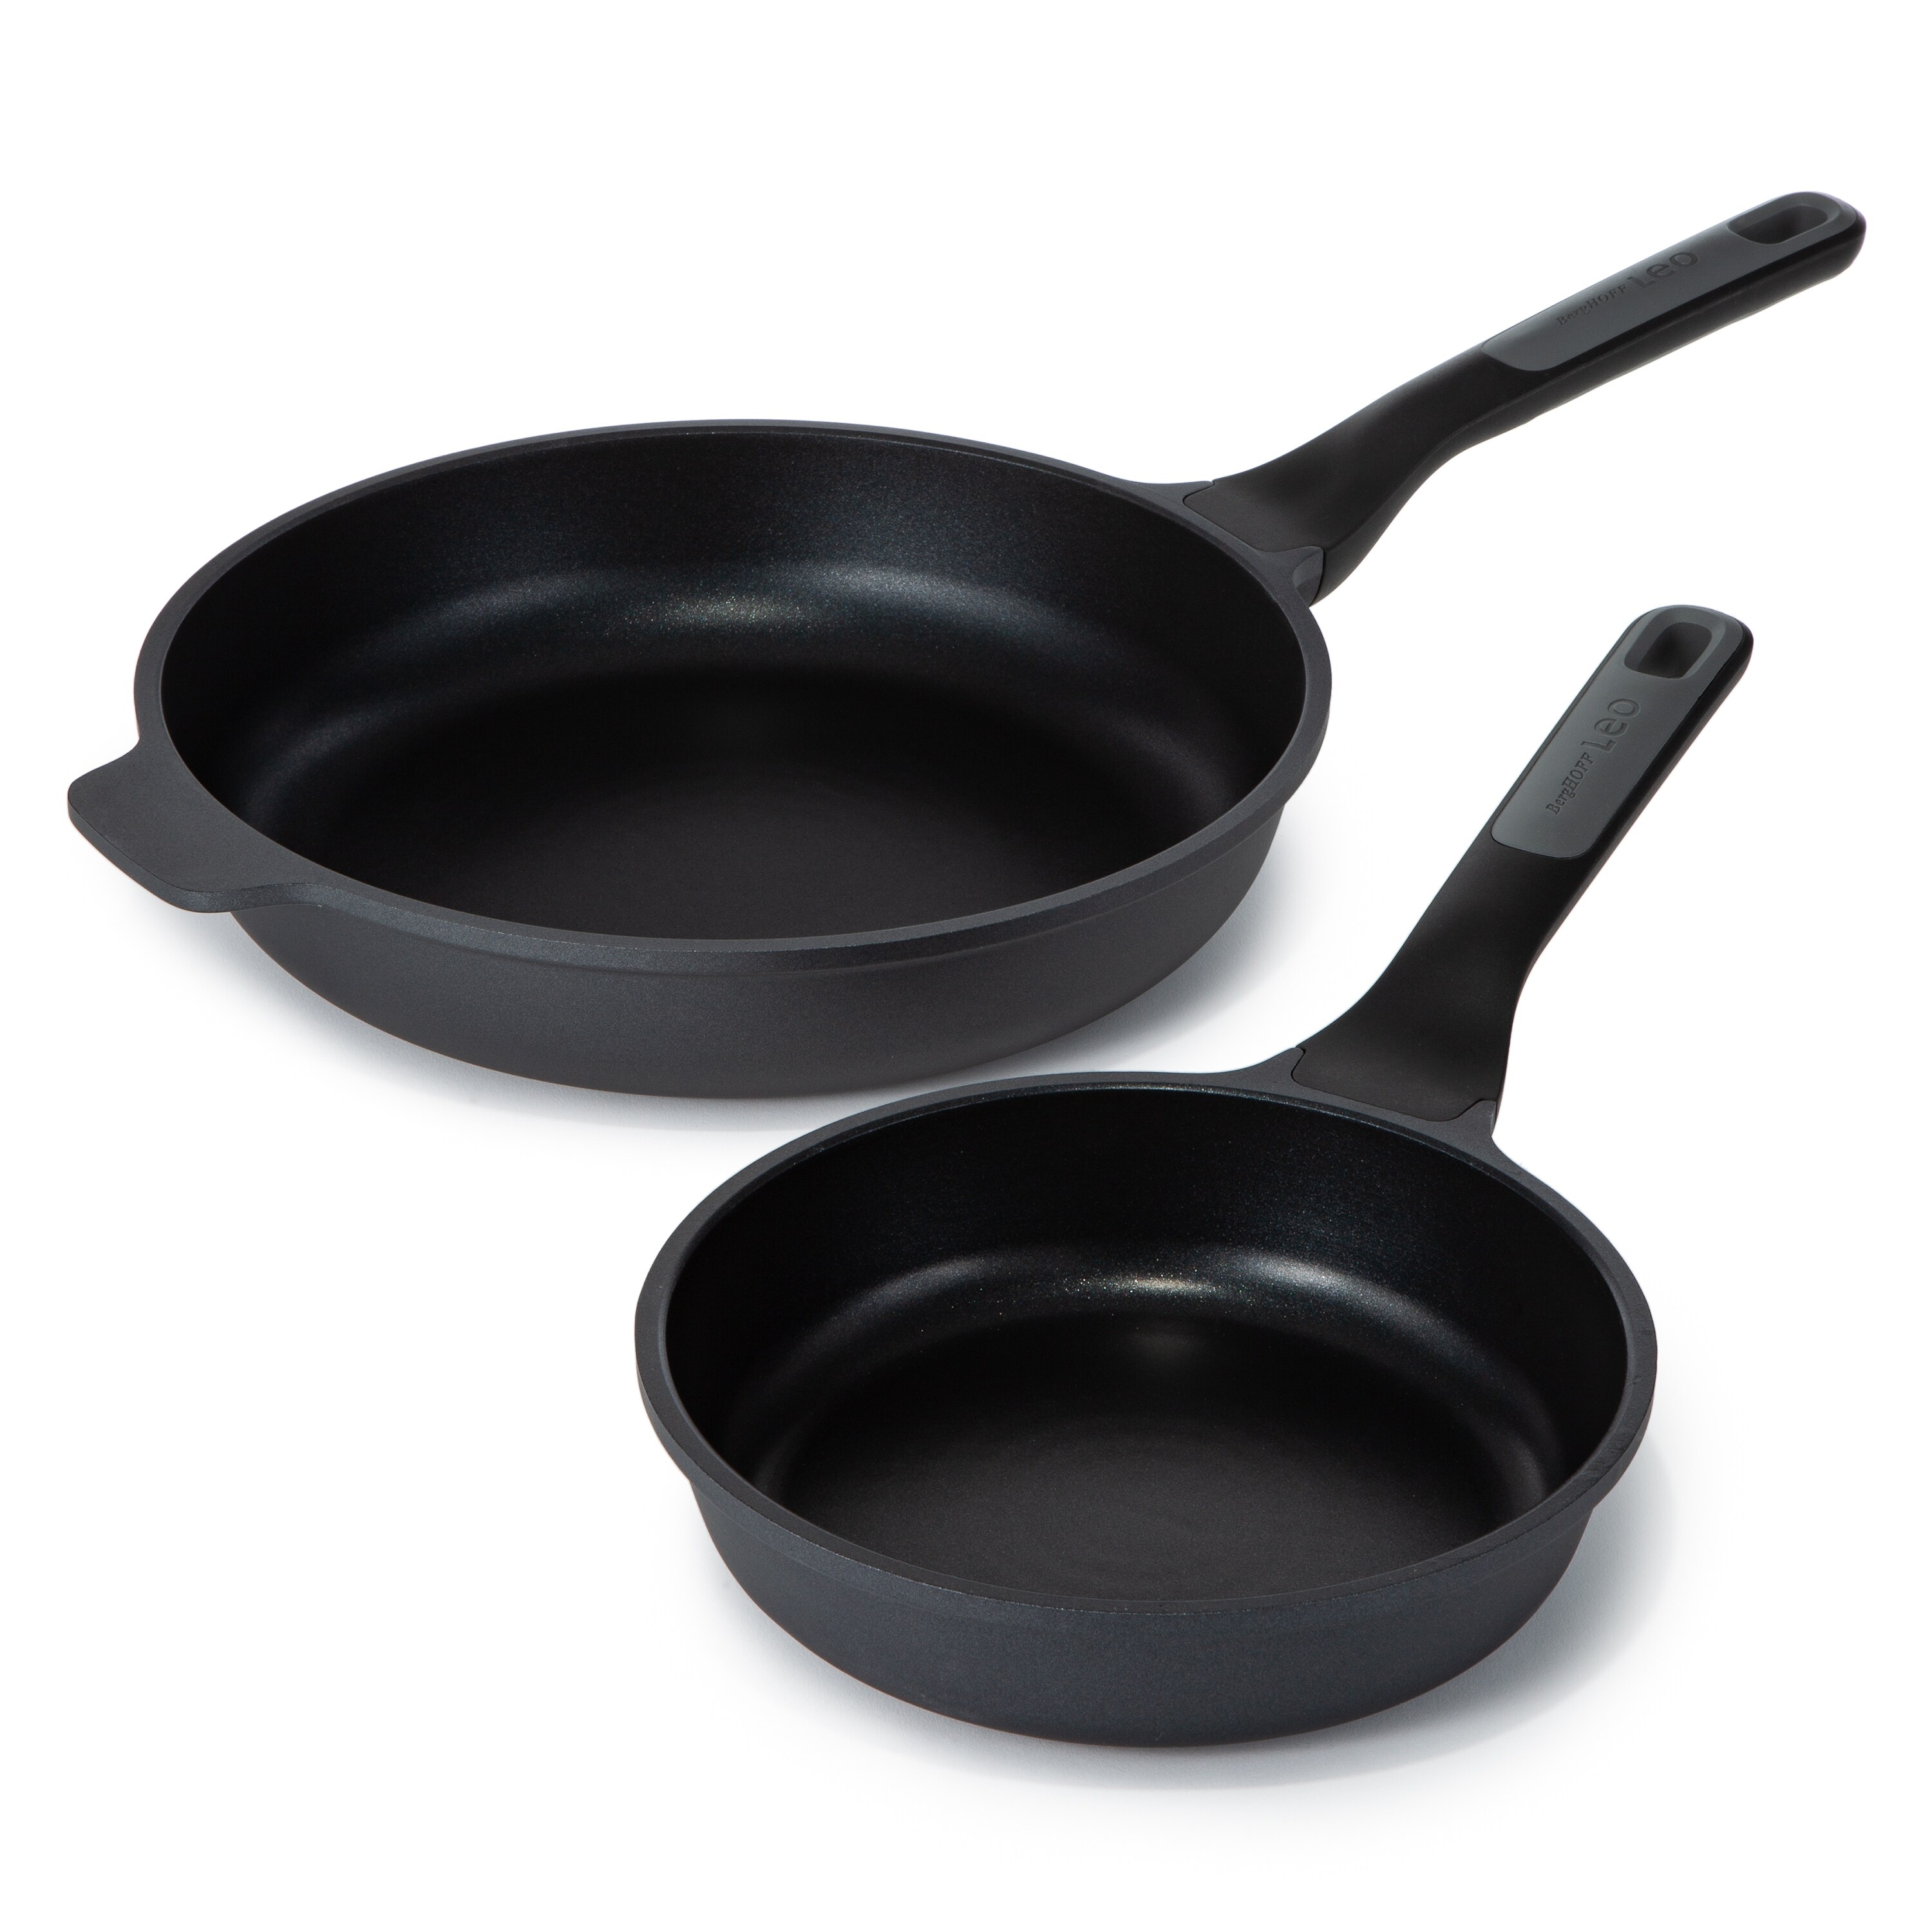 https://ak1.ostkcdn.com/images/products/is/images/direct/8507d45682ac17652a5211373d7b927ed85b72a5/BergHOFF-Stone-2Pc-Non-stick-Fry-Pan-Set.jpg